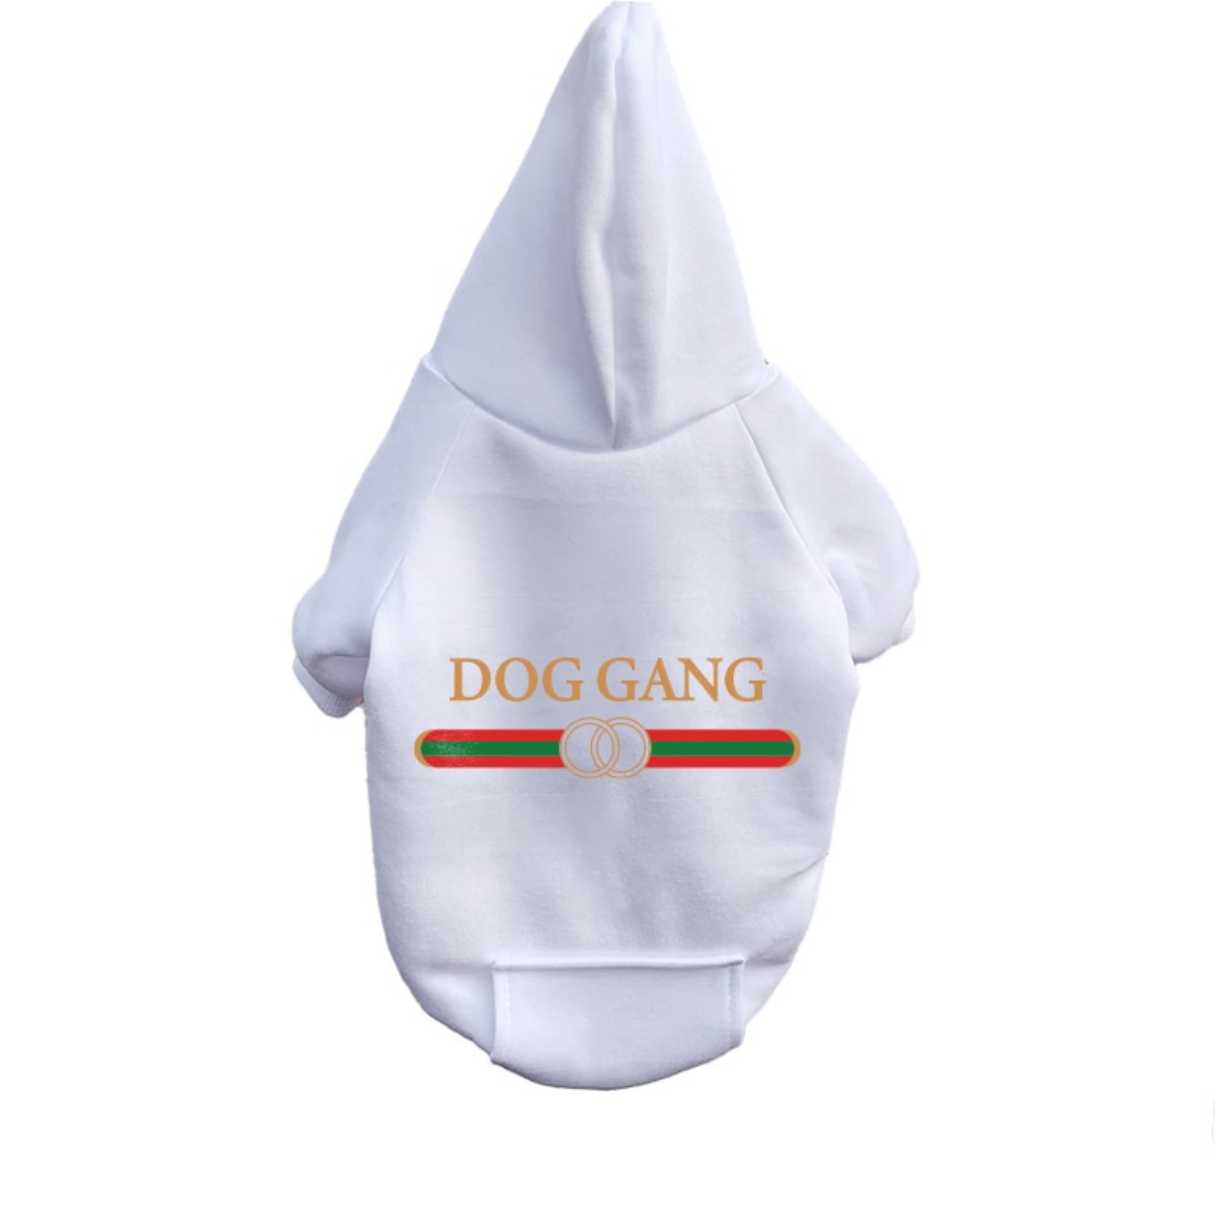 Dog gang white hoodie with gold writing